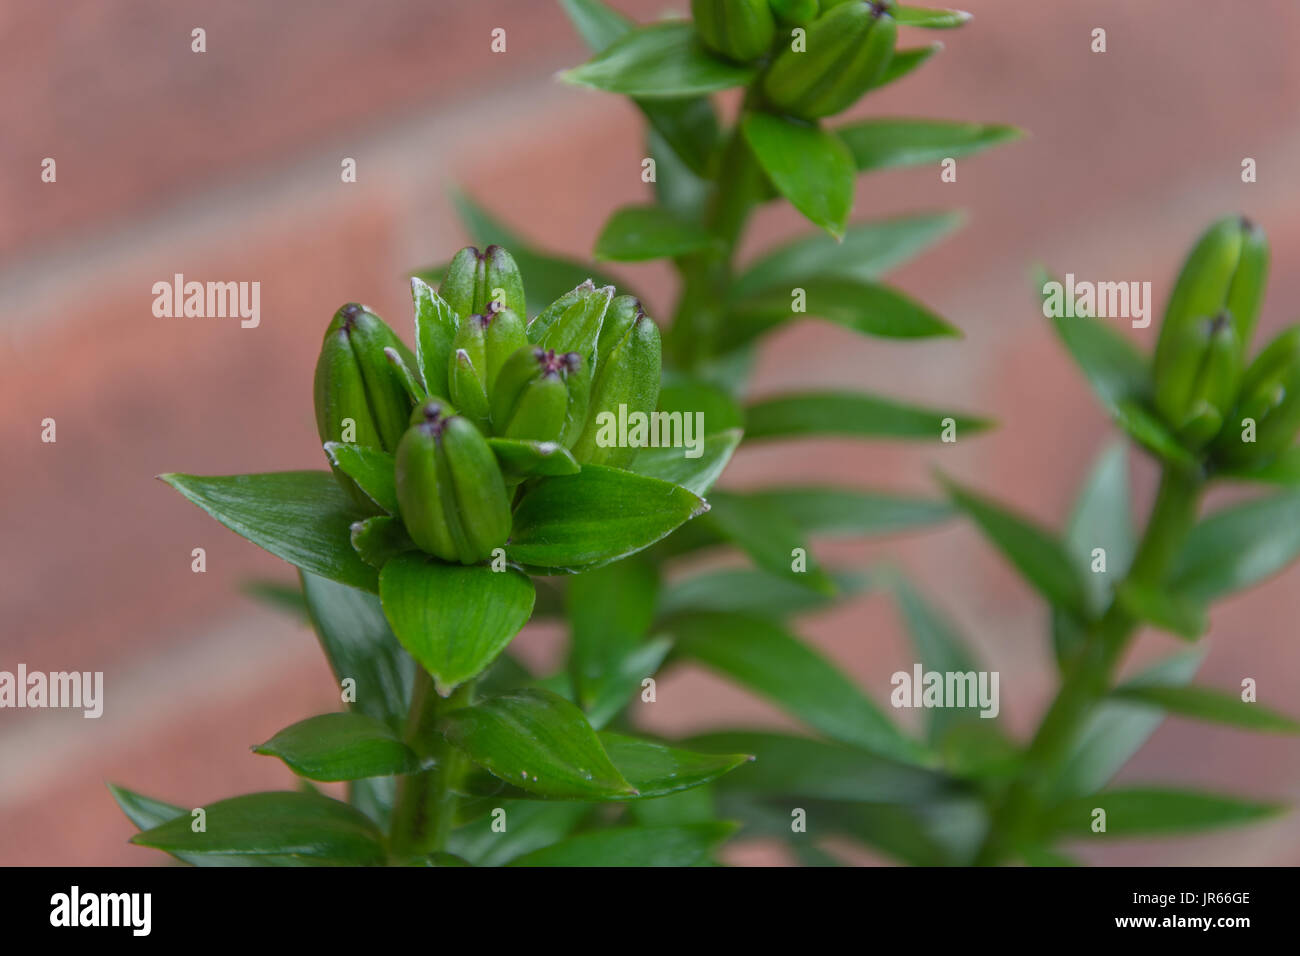 close up image of lily buds in the garden with a blurred brick wall background Stock Photo